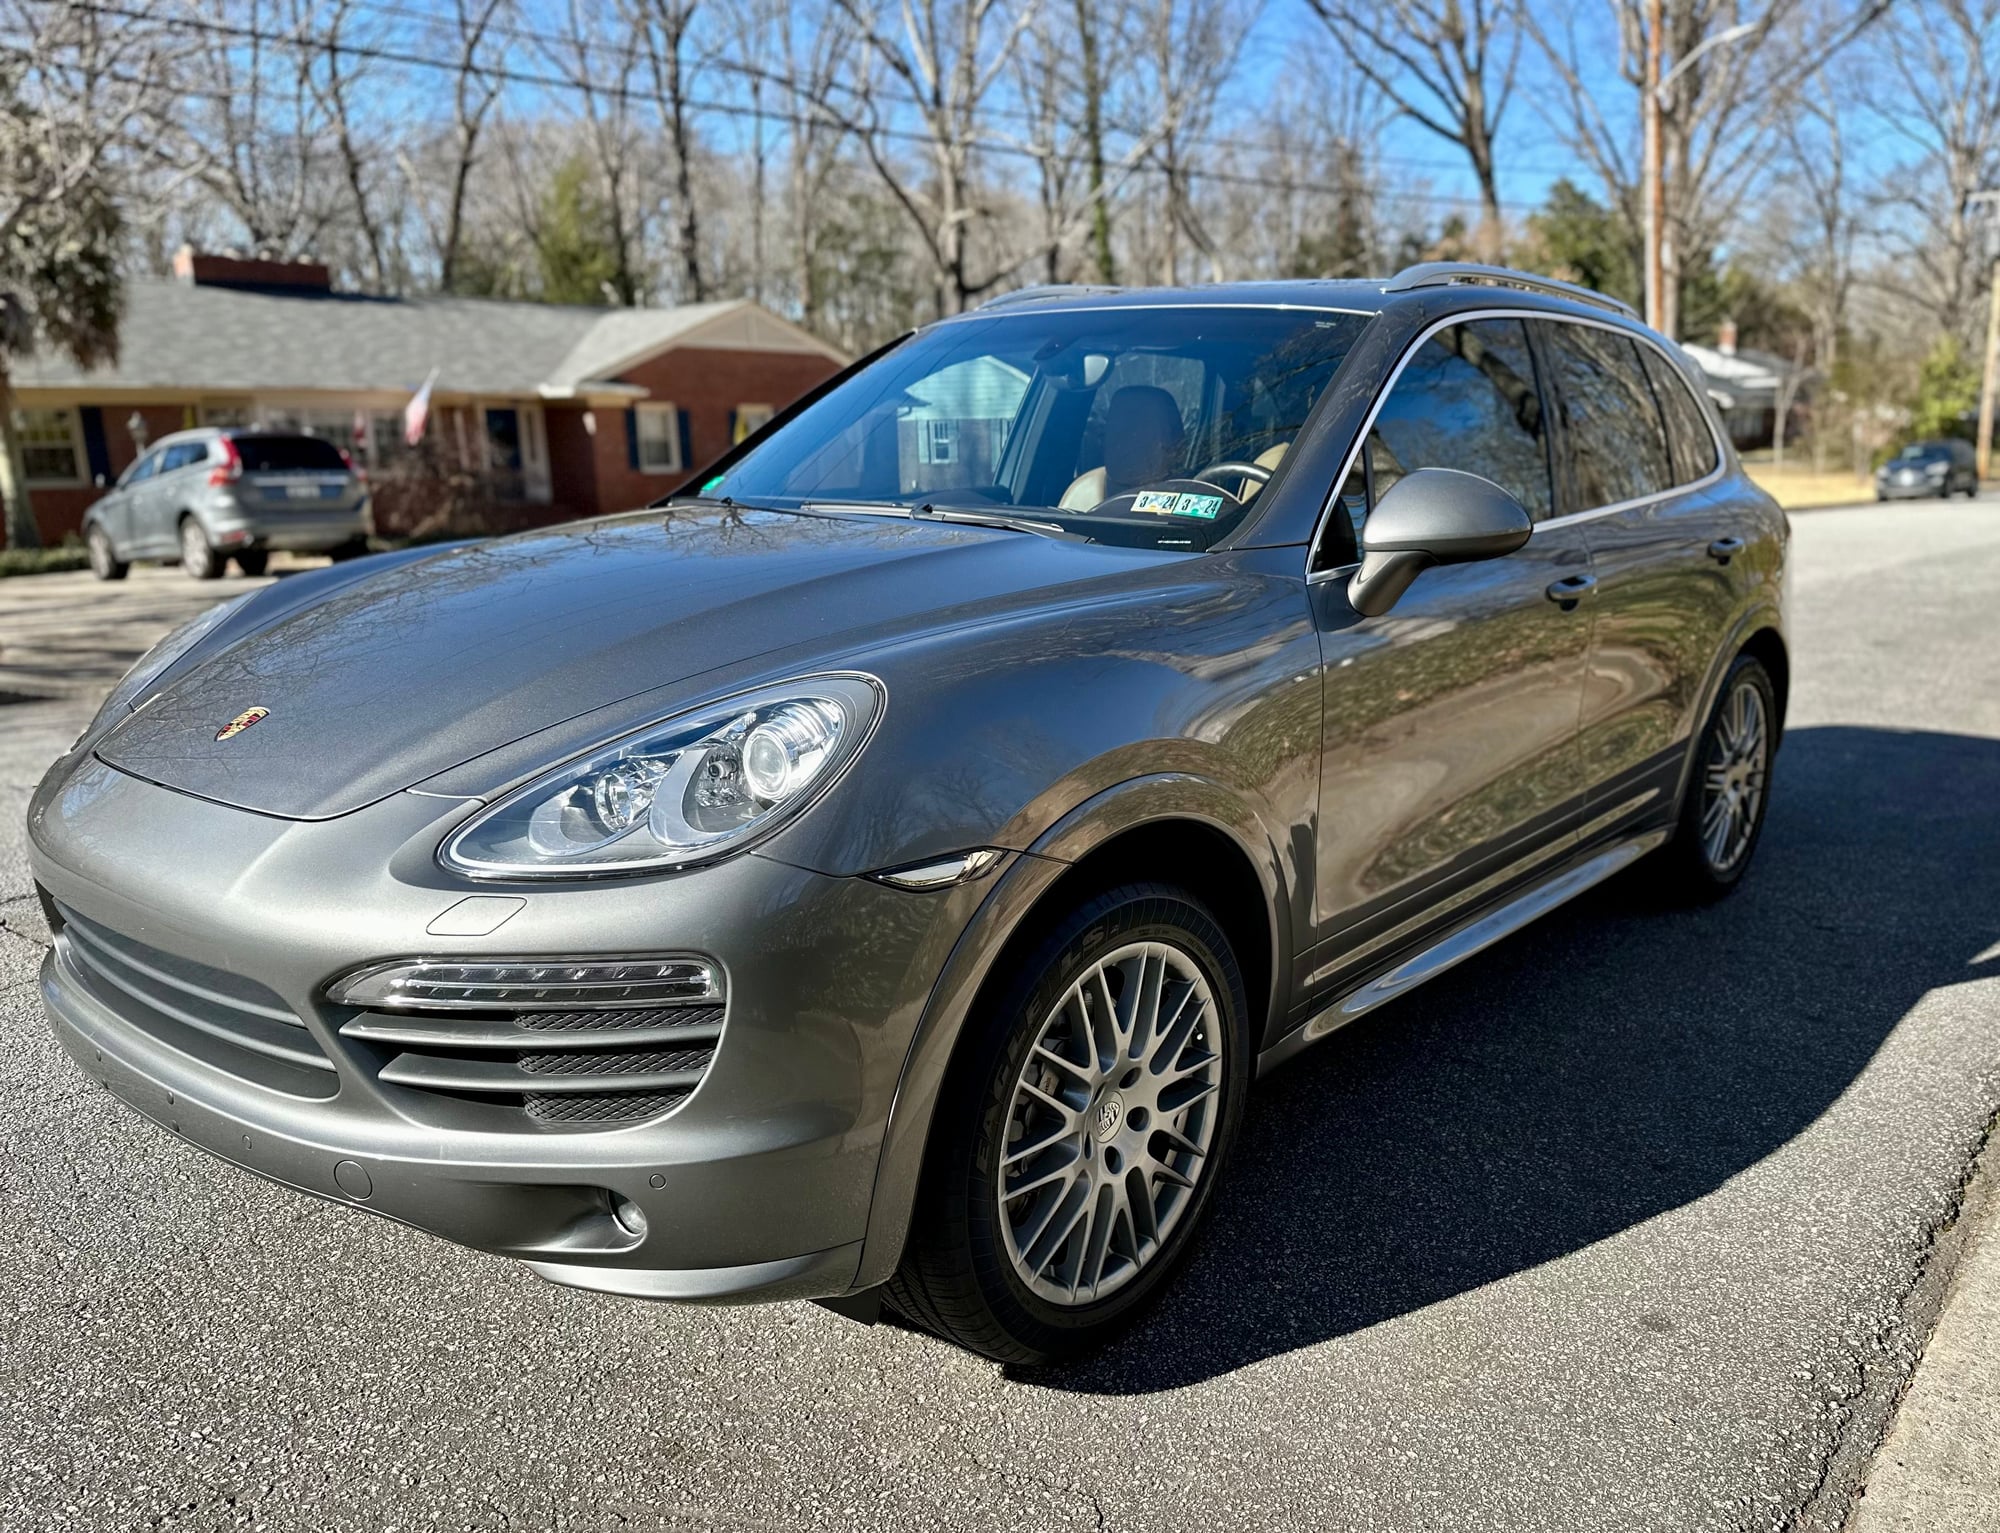 2013 Porsche Cayenne - 2013 Cayenne S 75k miles RARE locking diff - Used - VIN WP1AB2A28DLA81956 - 75,500 Miles - 8 cyl - 4WD - Automatic - SUV - Gray - Greenville, SC 29609, United States